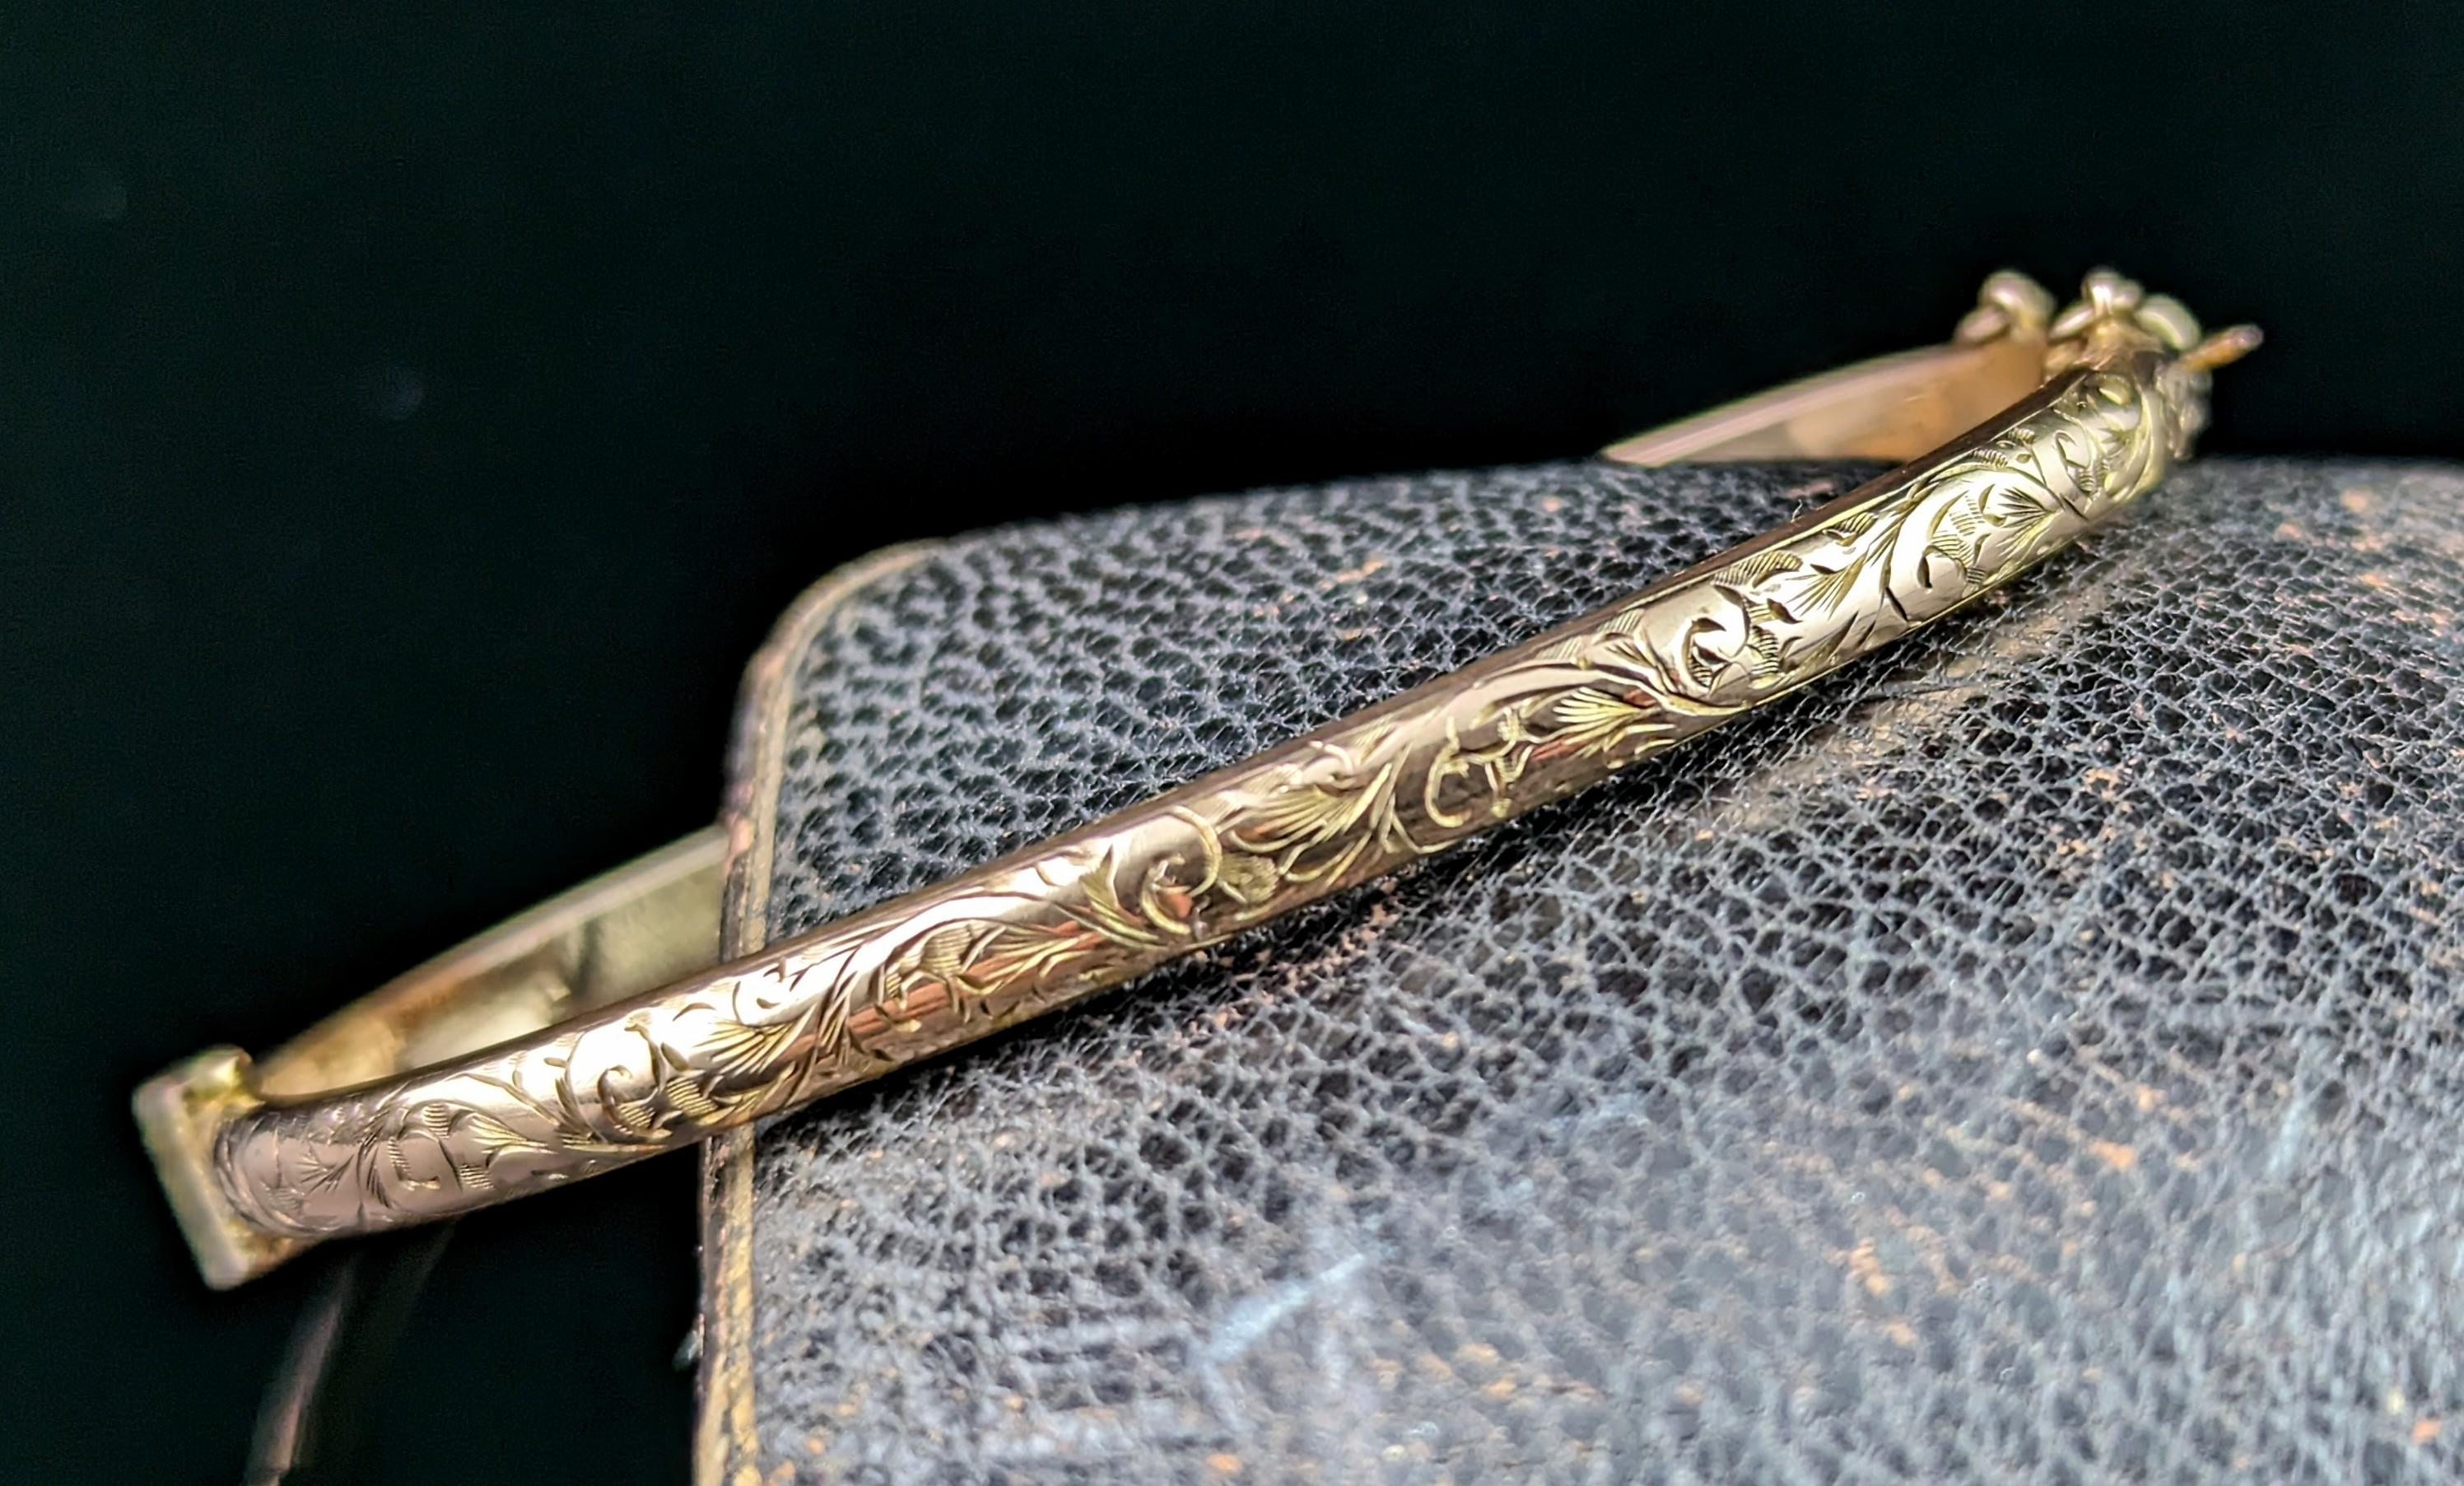 A very pretty antique early Art Deco era 9ct gold floral engraved bangle.

A very pretty design with a slim plain polished reverse and foliate engraved front.

The bangle is slender with an elaborate floral engraving.

A truly beautiful and